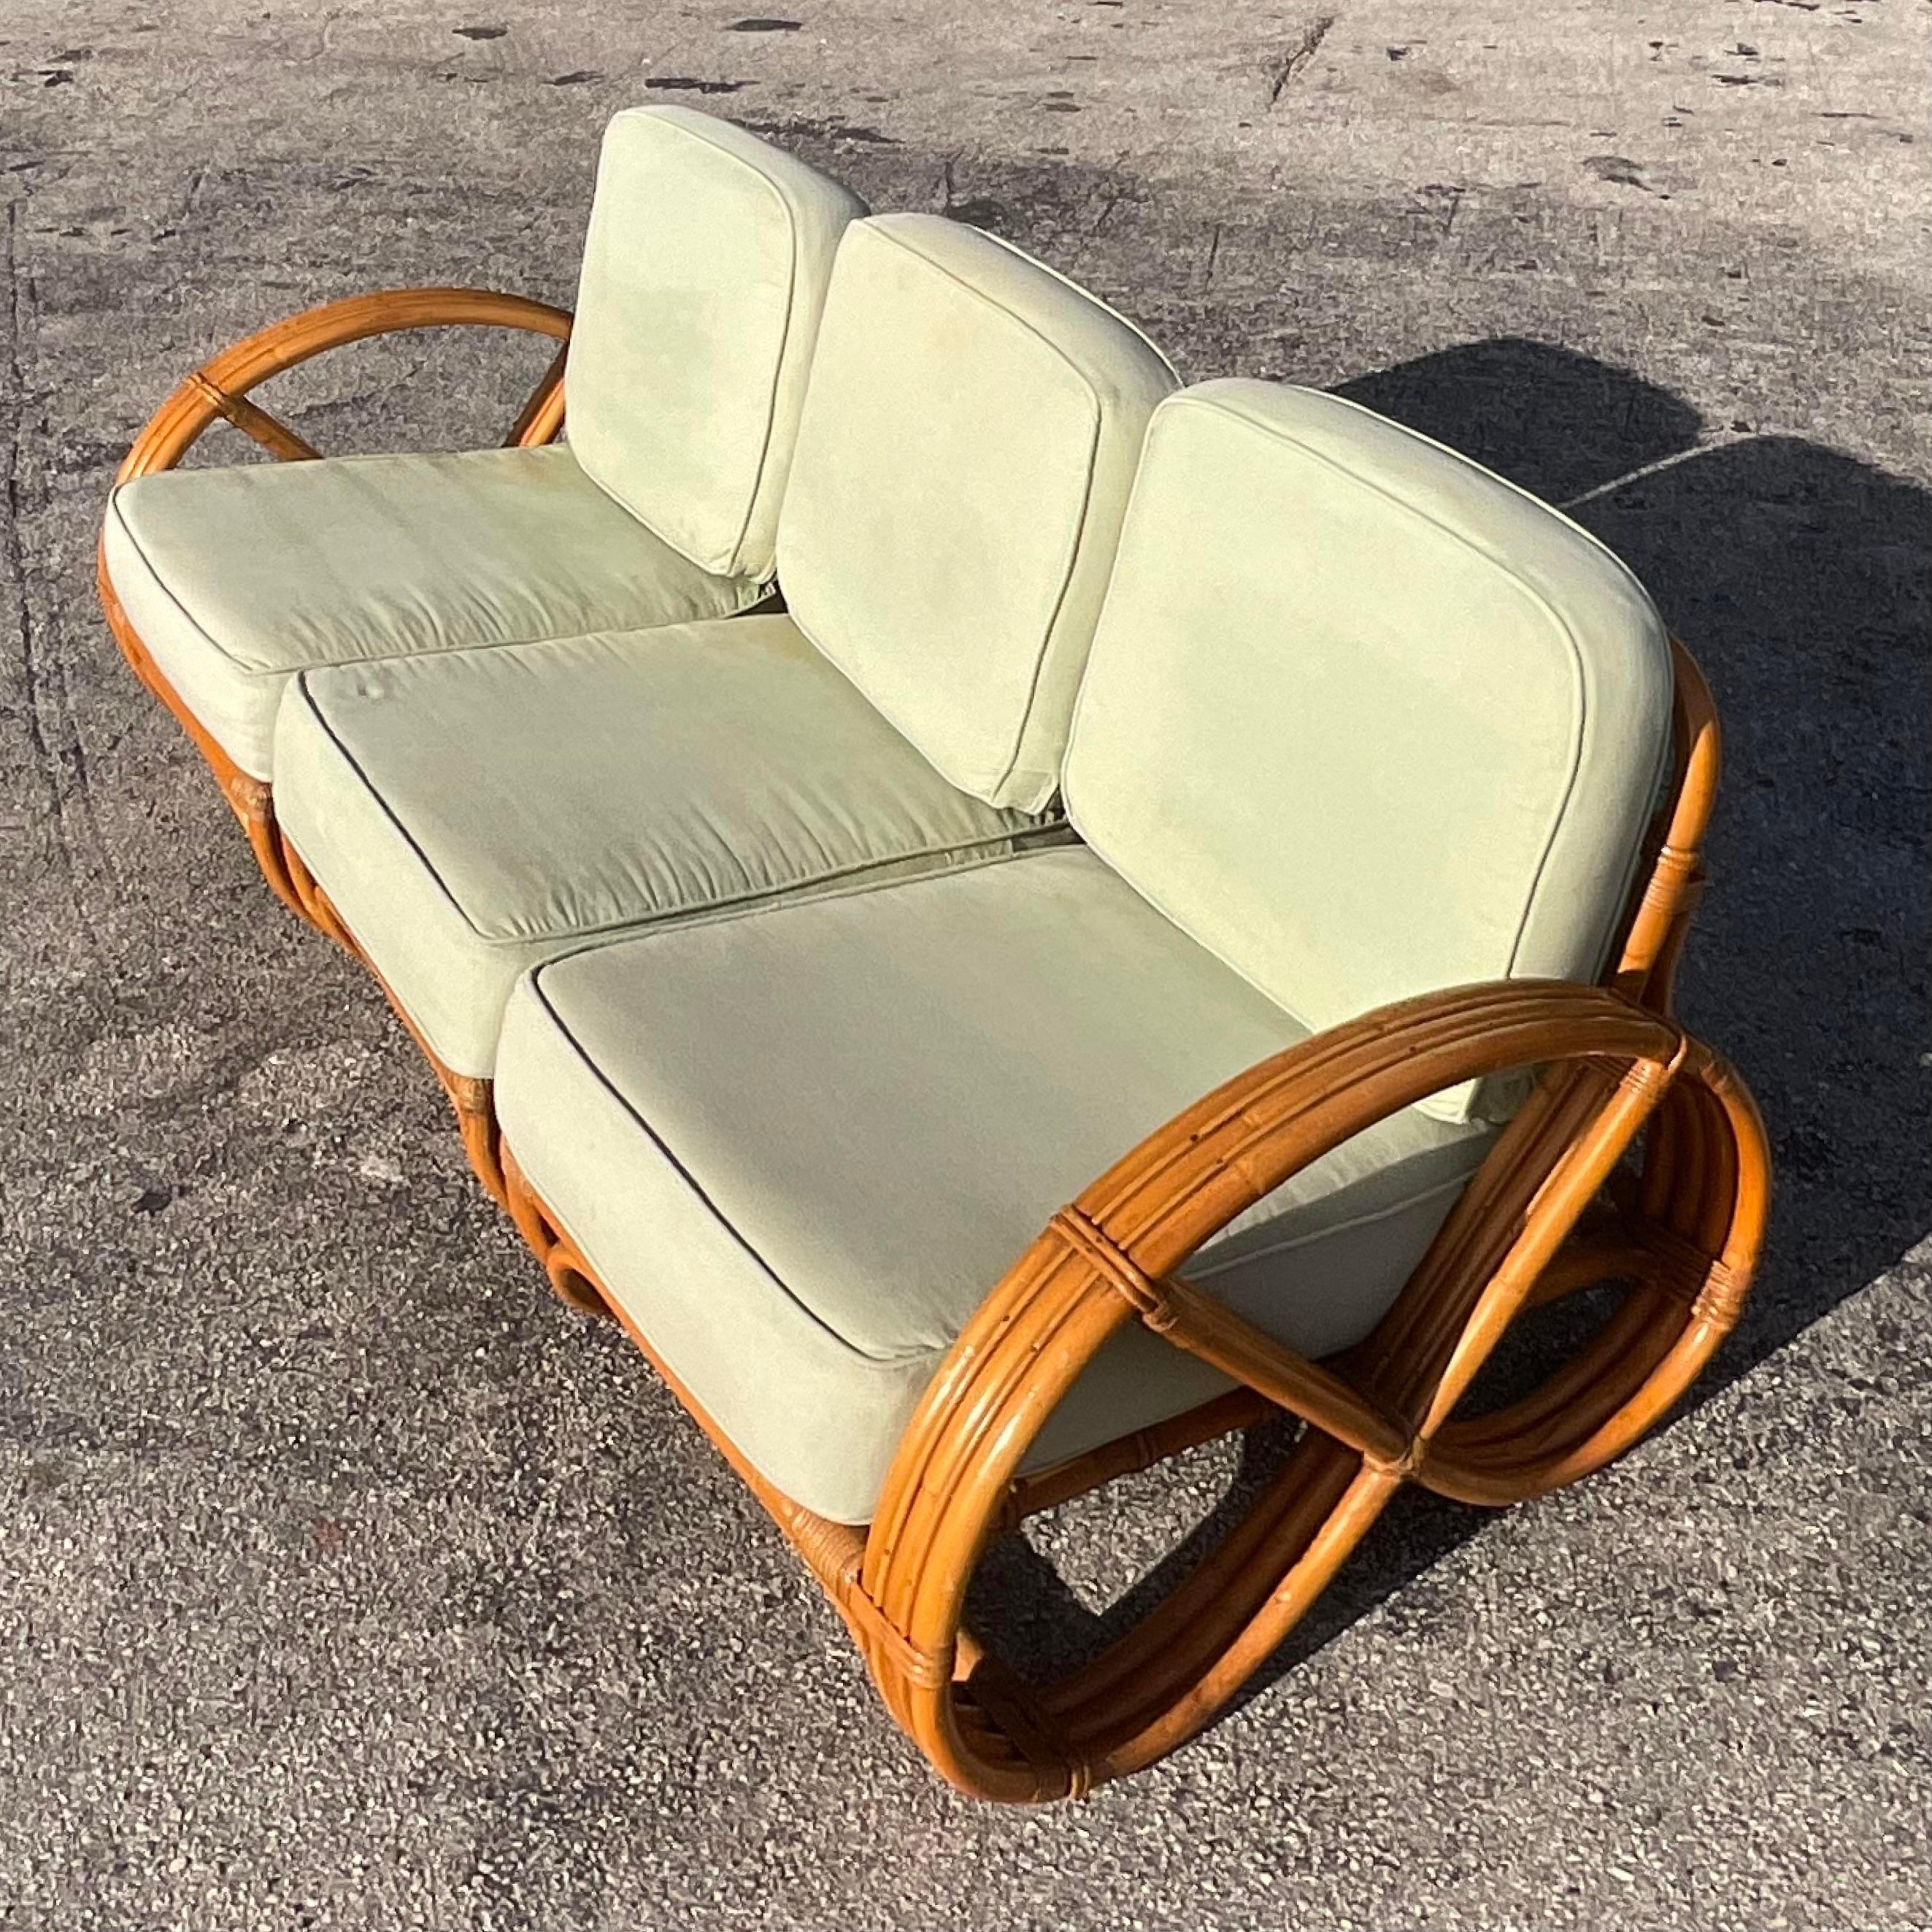 A fantastic vintage Coastal three seat sofa. An iconic shape done in the manner of Paul Frankl. Deep set seats and loop arms. Acquired from a Palm Beach estate